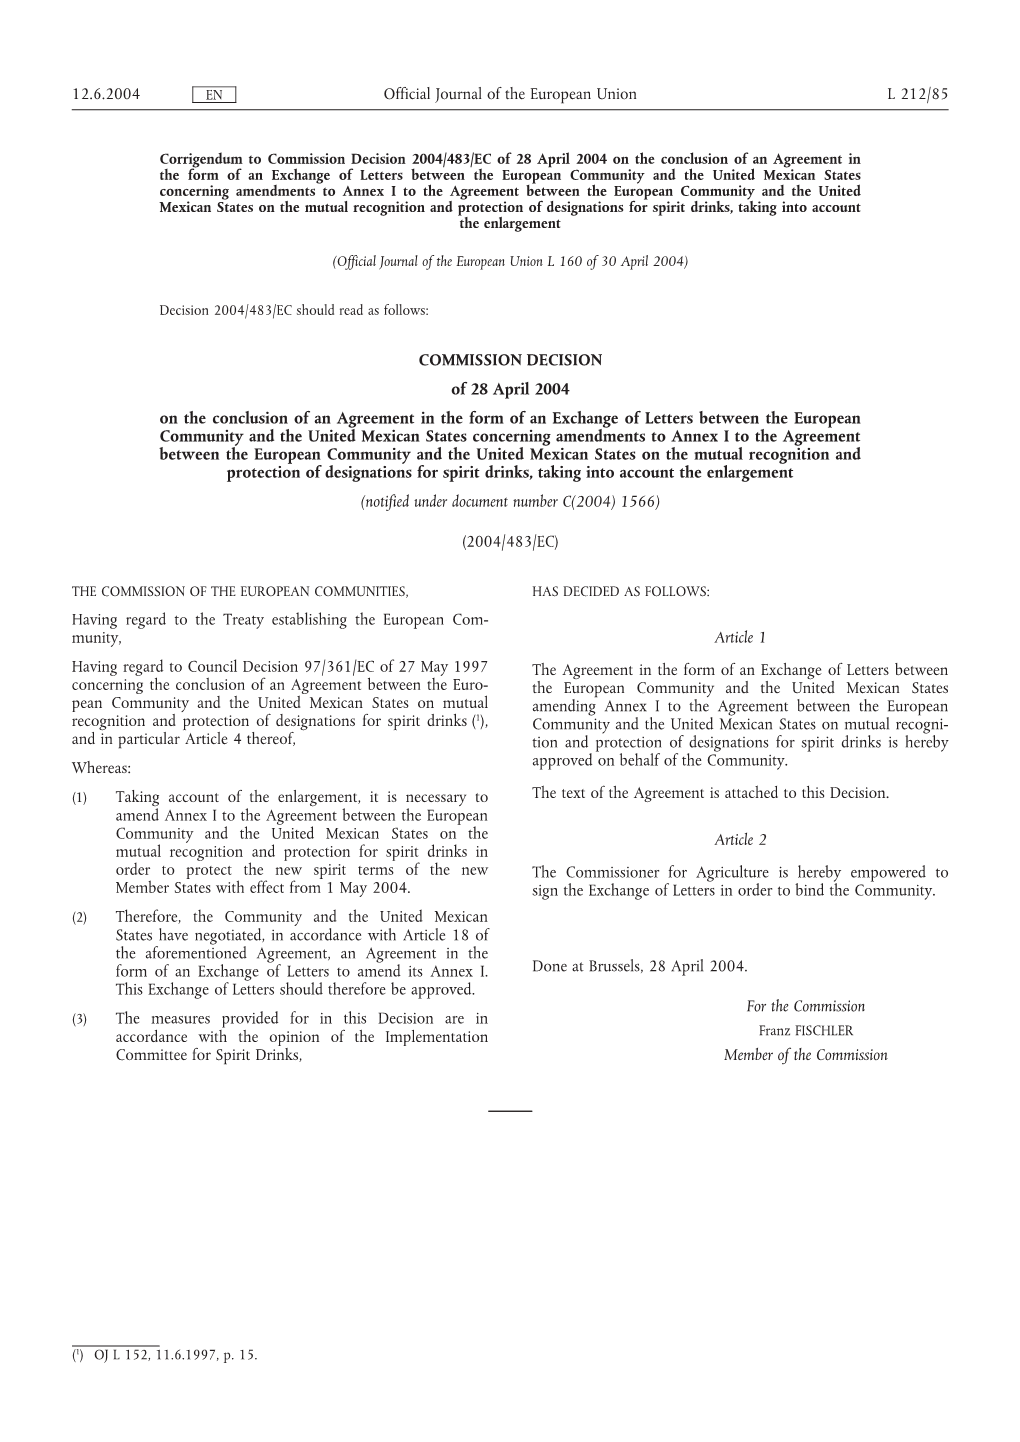 COMMISSION DECISION of 28 April 2004 on the Conclusion of An